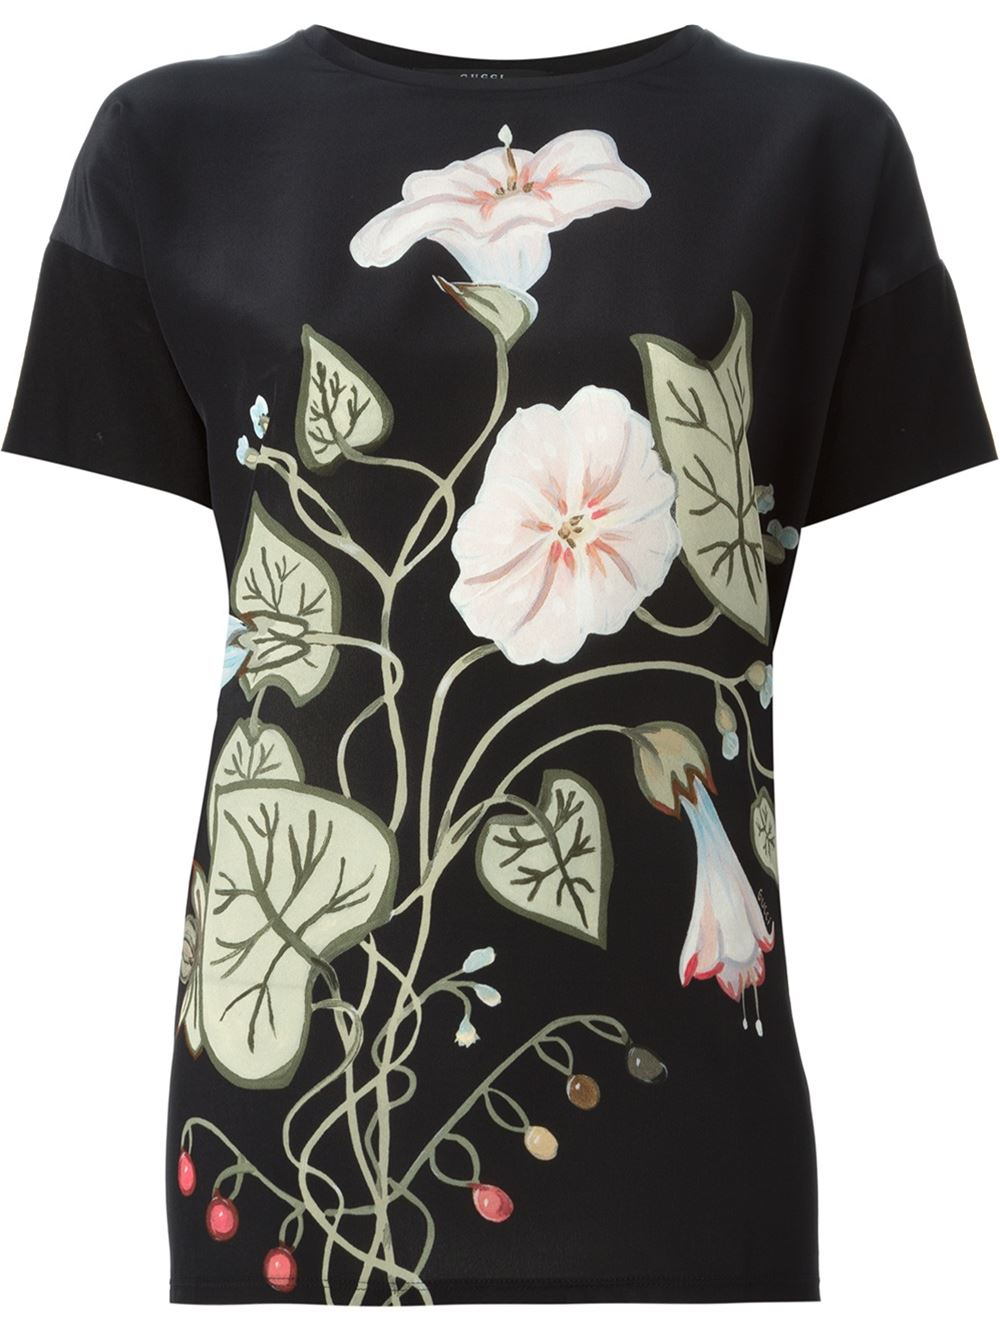 Gucci Floral Print Top in Black | Lyst